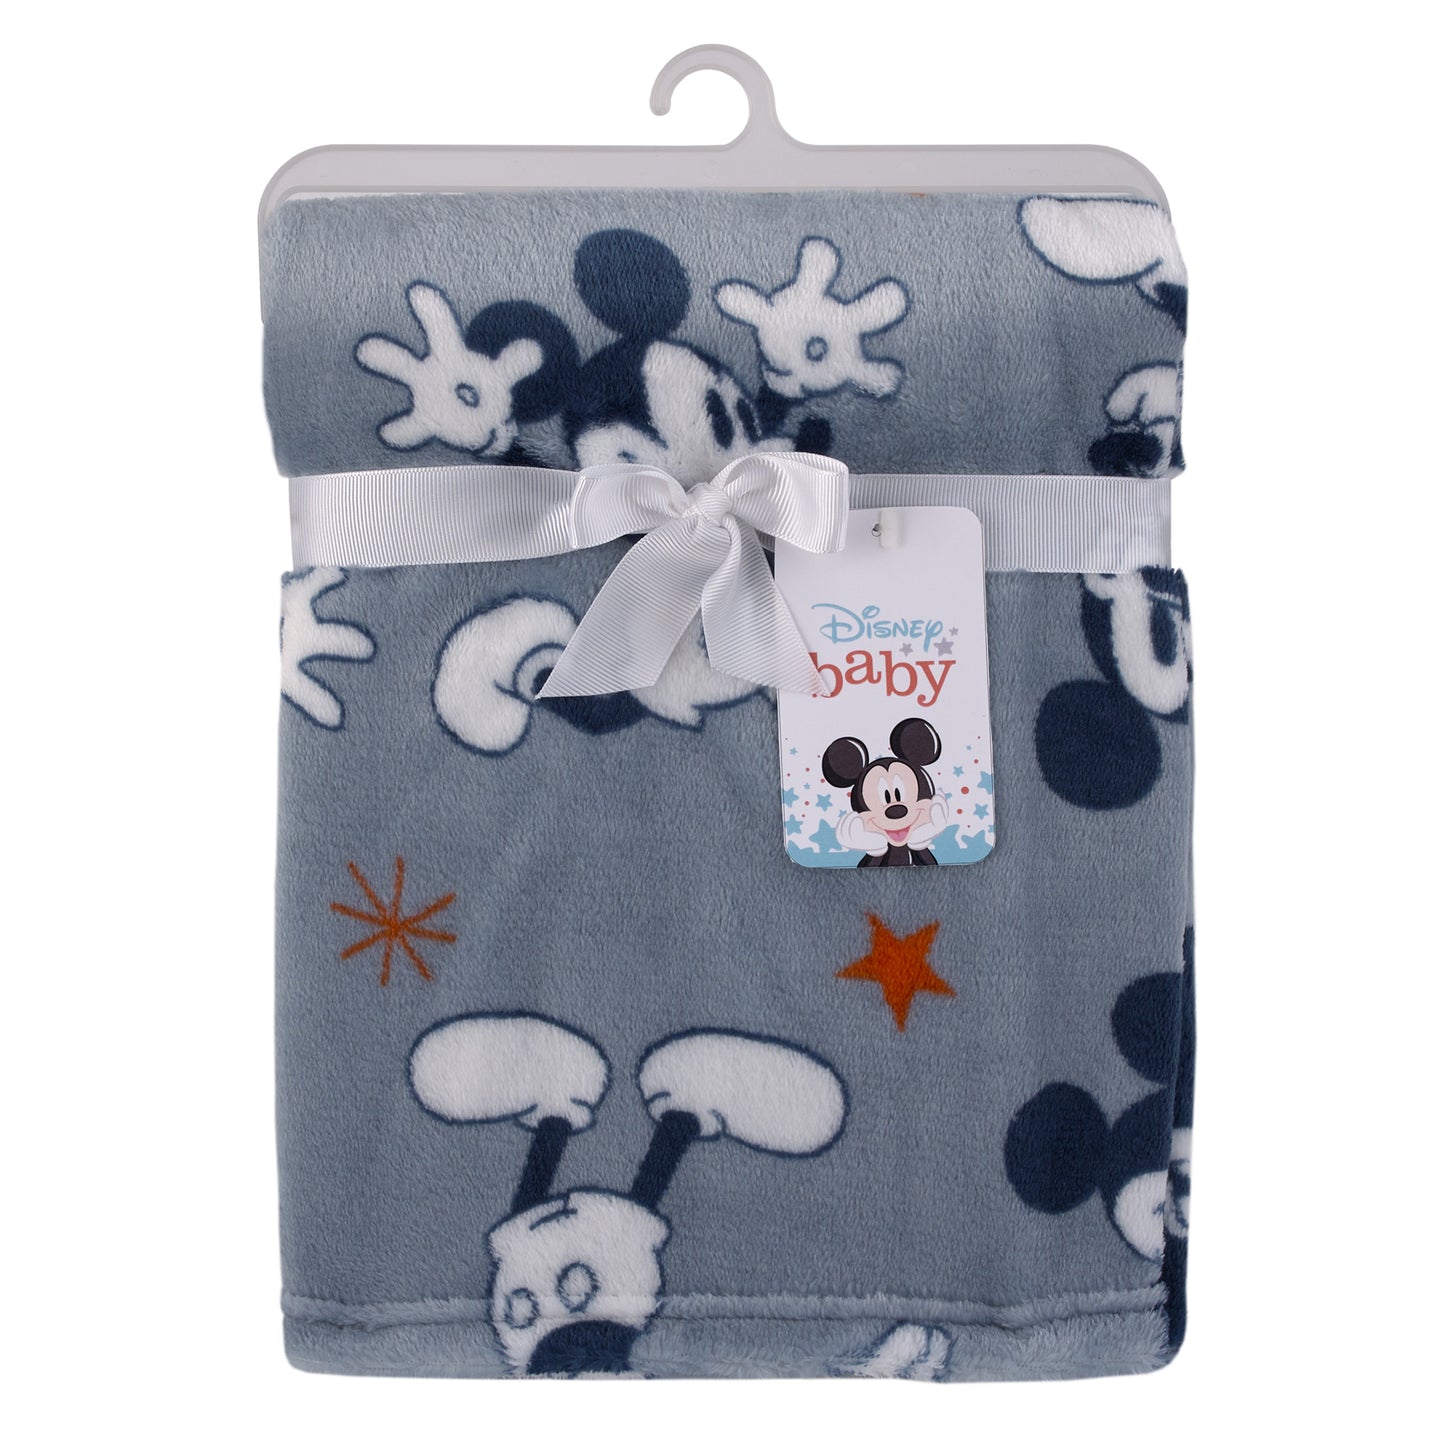 Disney Mickey Mouse Gray, Navy, White and Red Stars Super Soft Baby Blanket